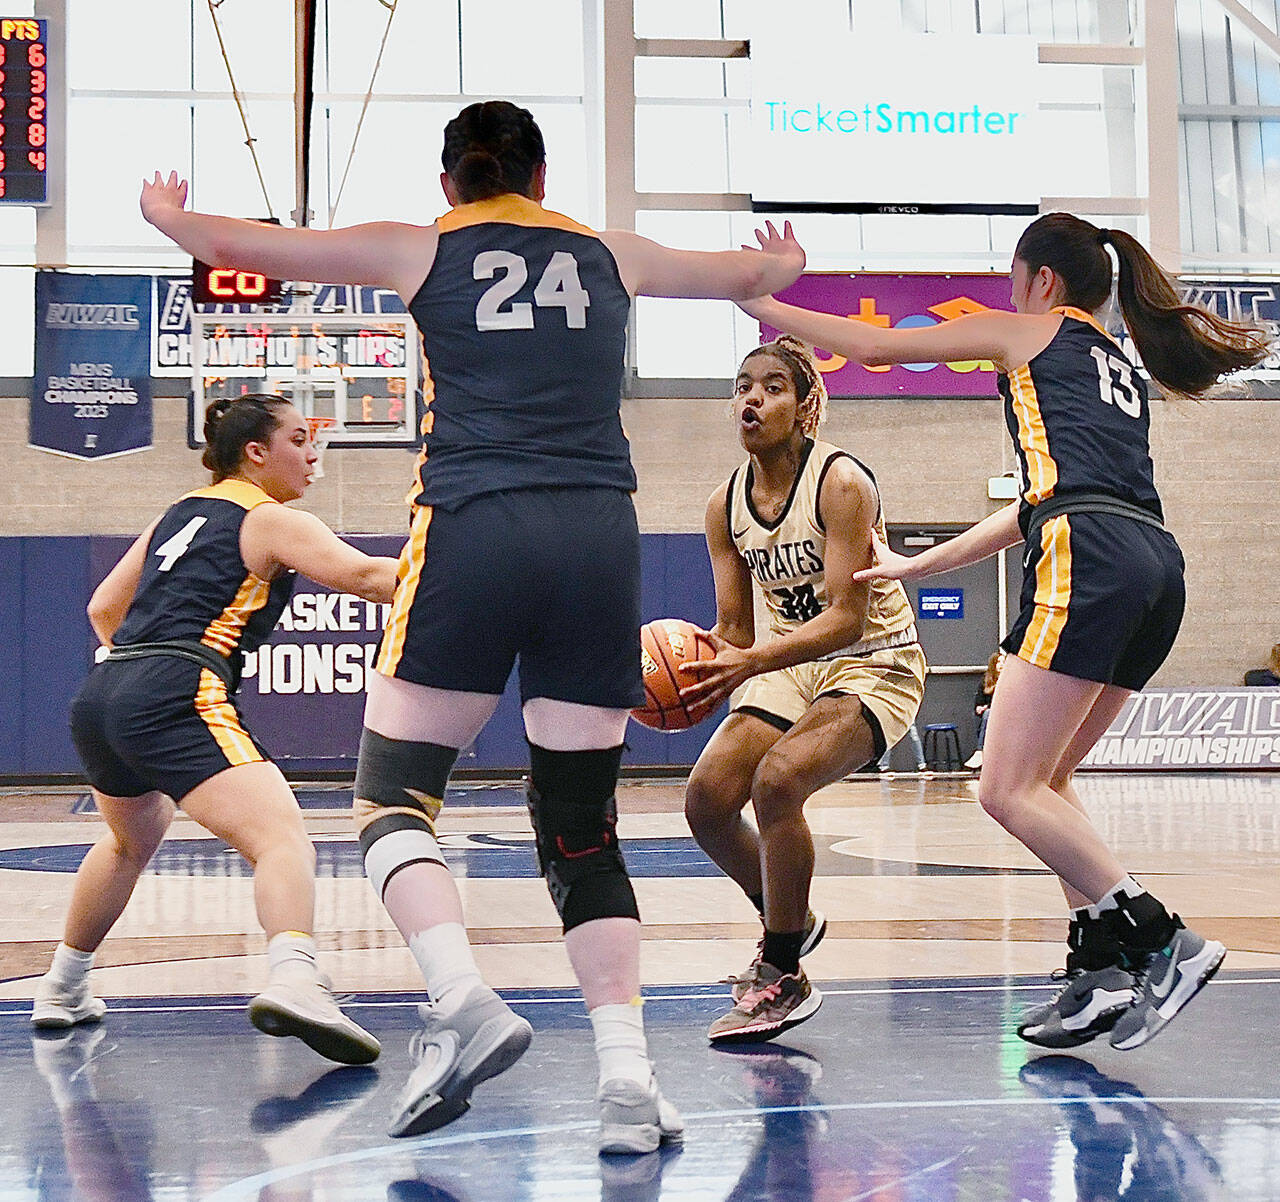 Peninsula’s Chasity Selden is surrounded by a triple team from Linn-Benton during the Pirates’ NWAC Women’s Basketball Tournament contest at Columbia Basin College on Thursday. (Jay Cline/for Peninsula College)